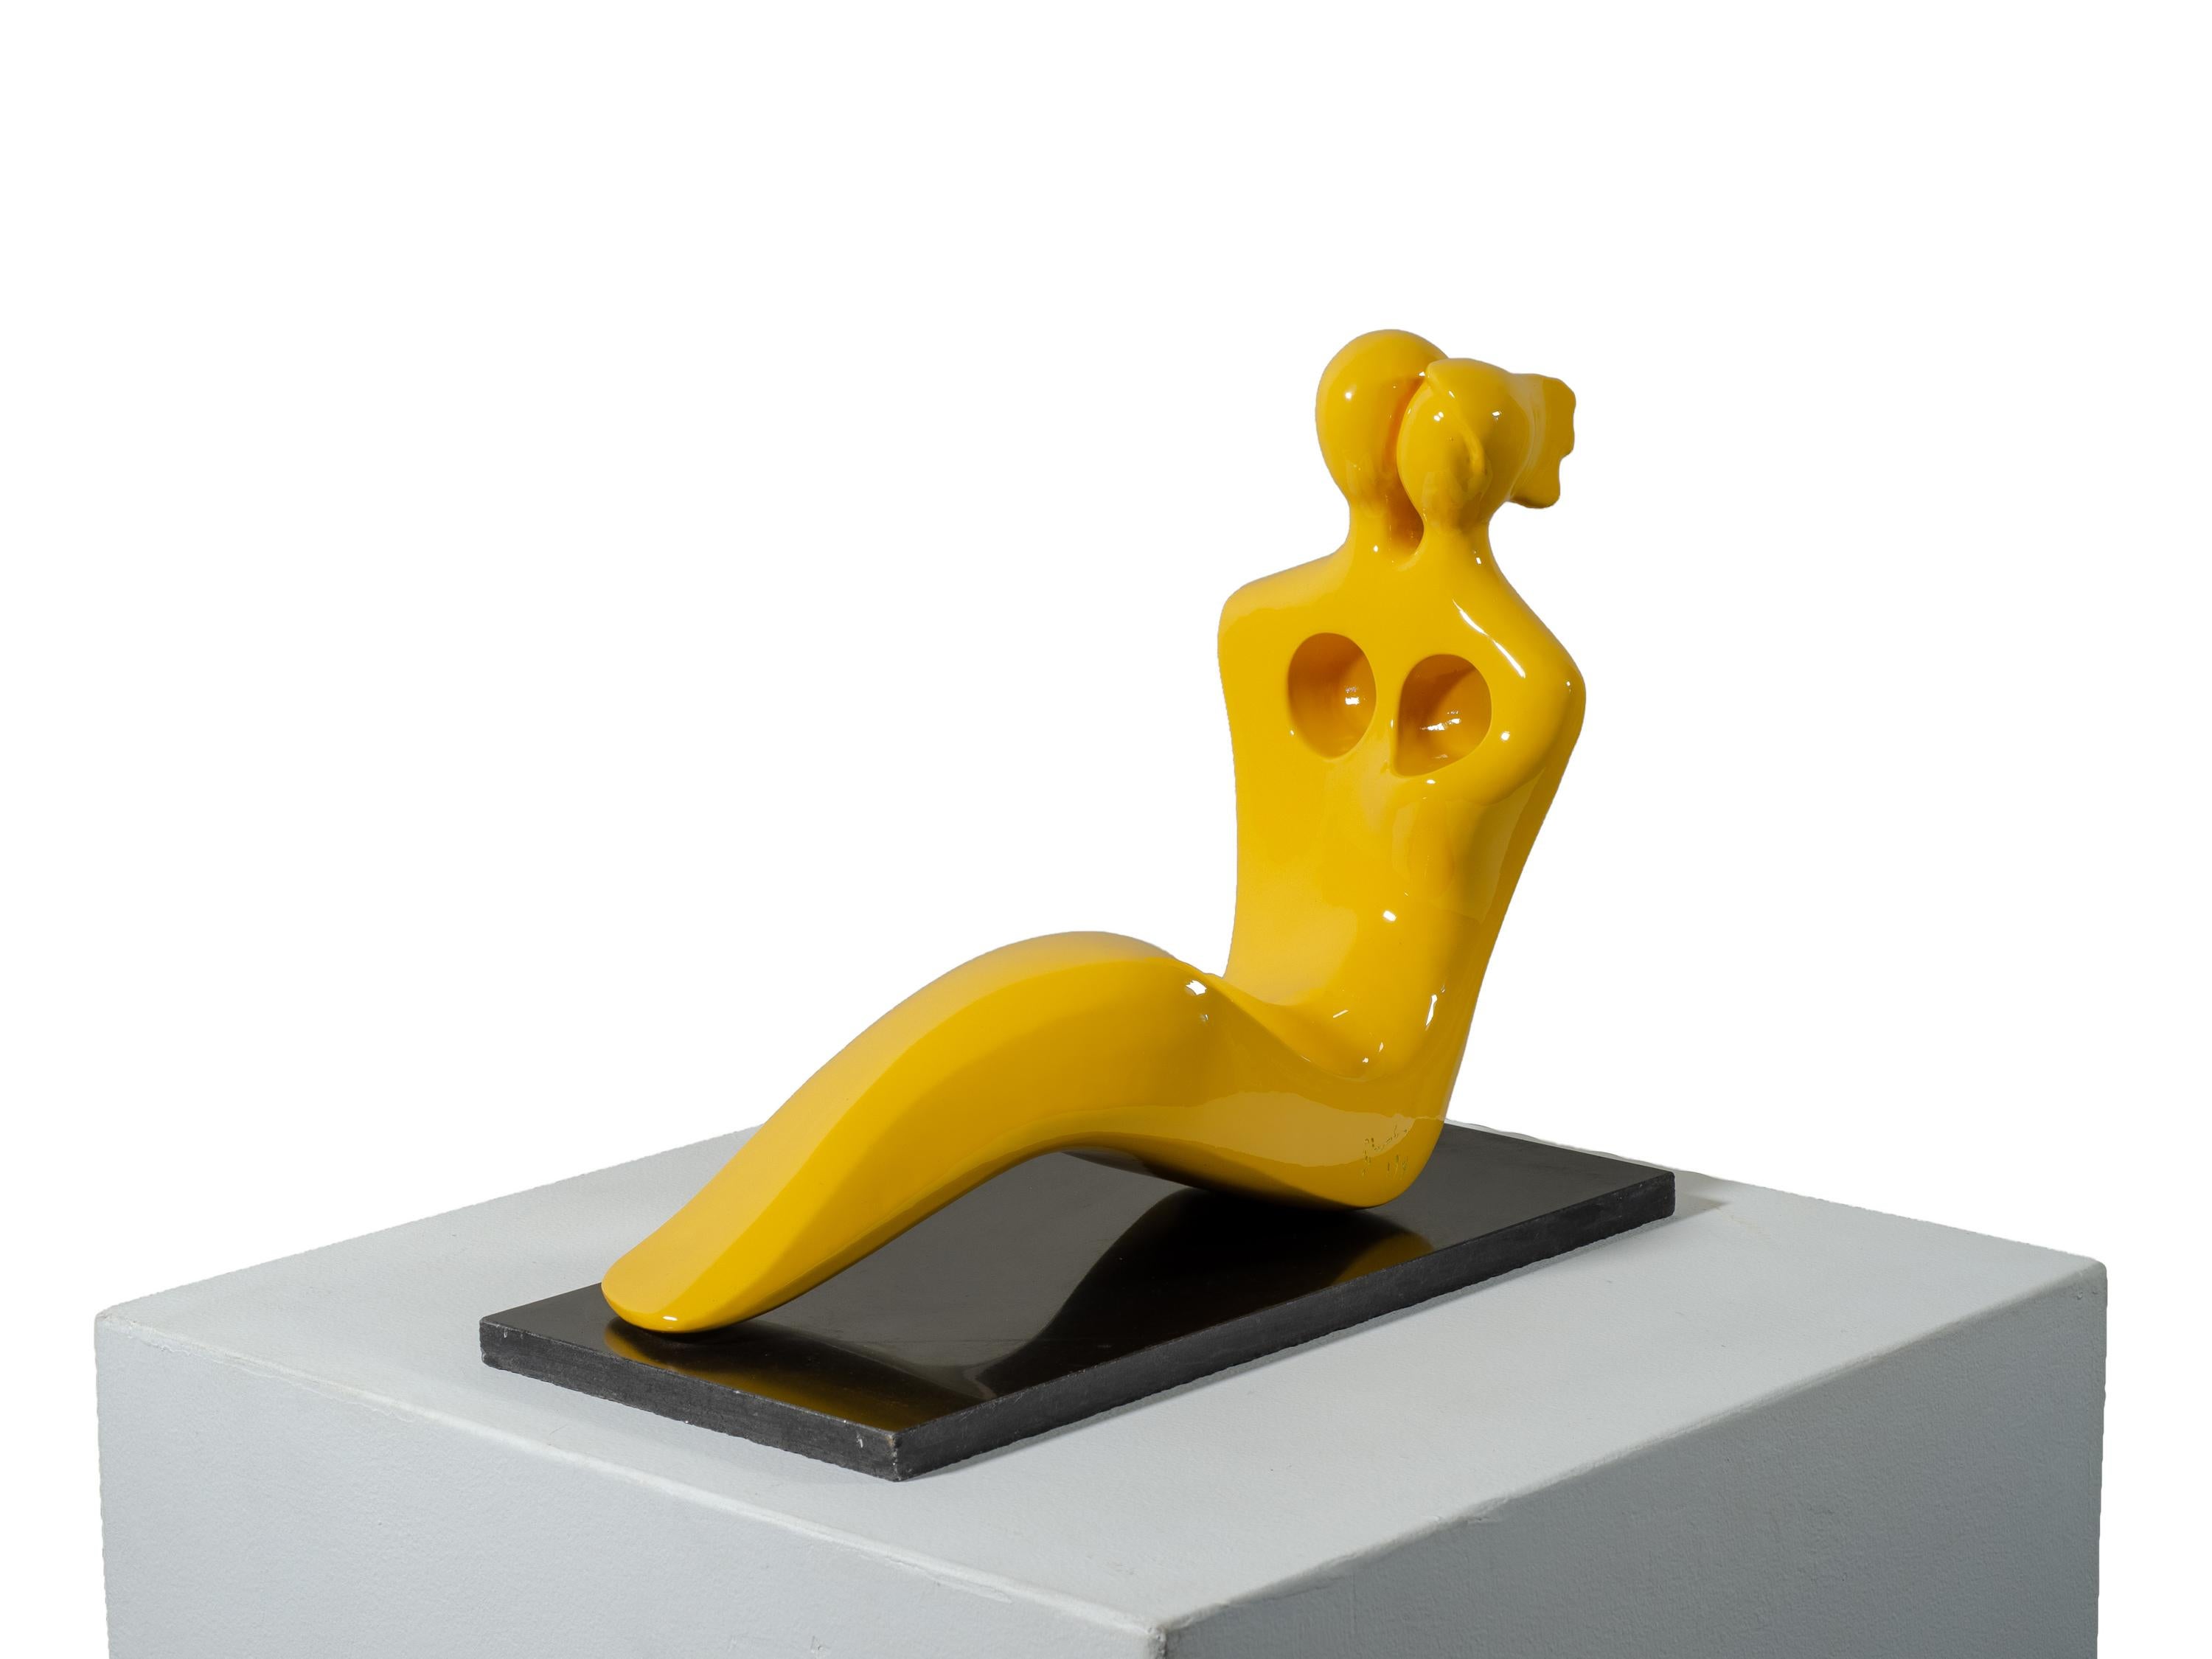 Beatriz Gerenstein Abstract Sculpture - Soul Mates #3 (in yellow) When in love their souls and bodies fuse into one.